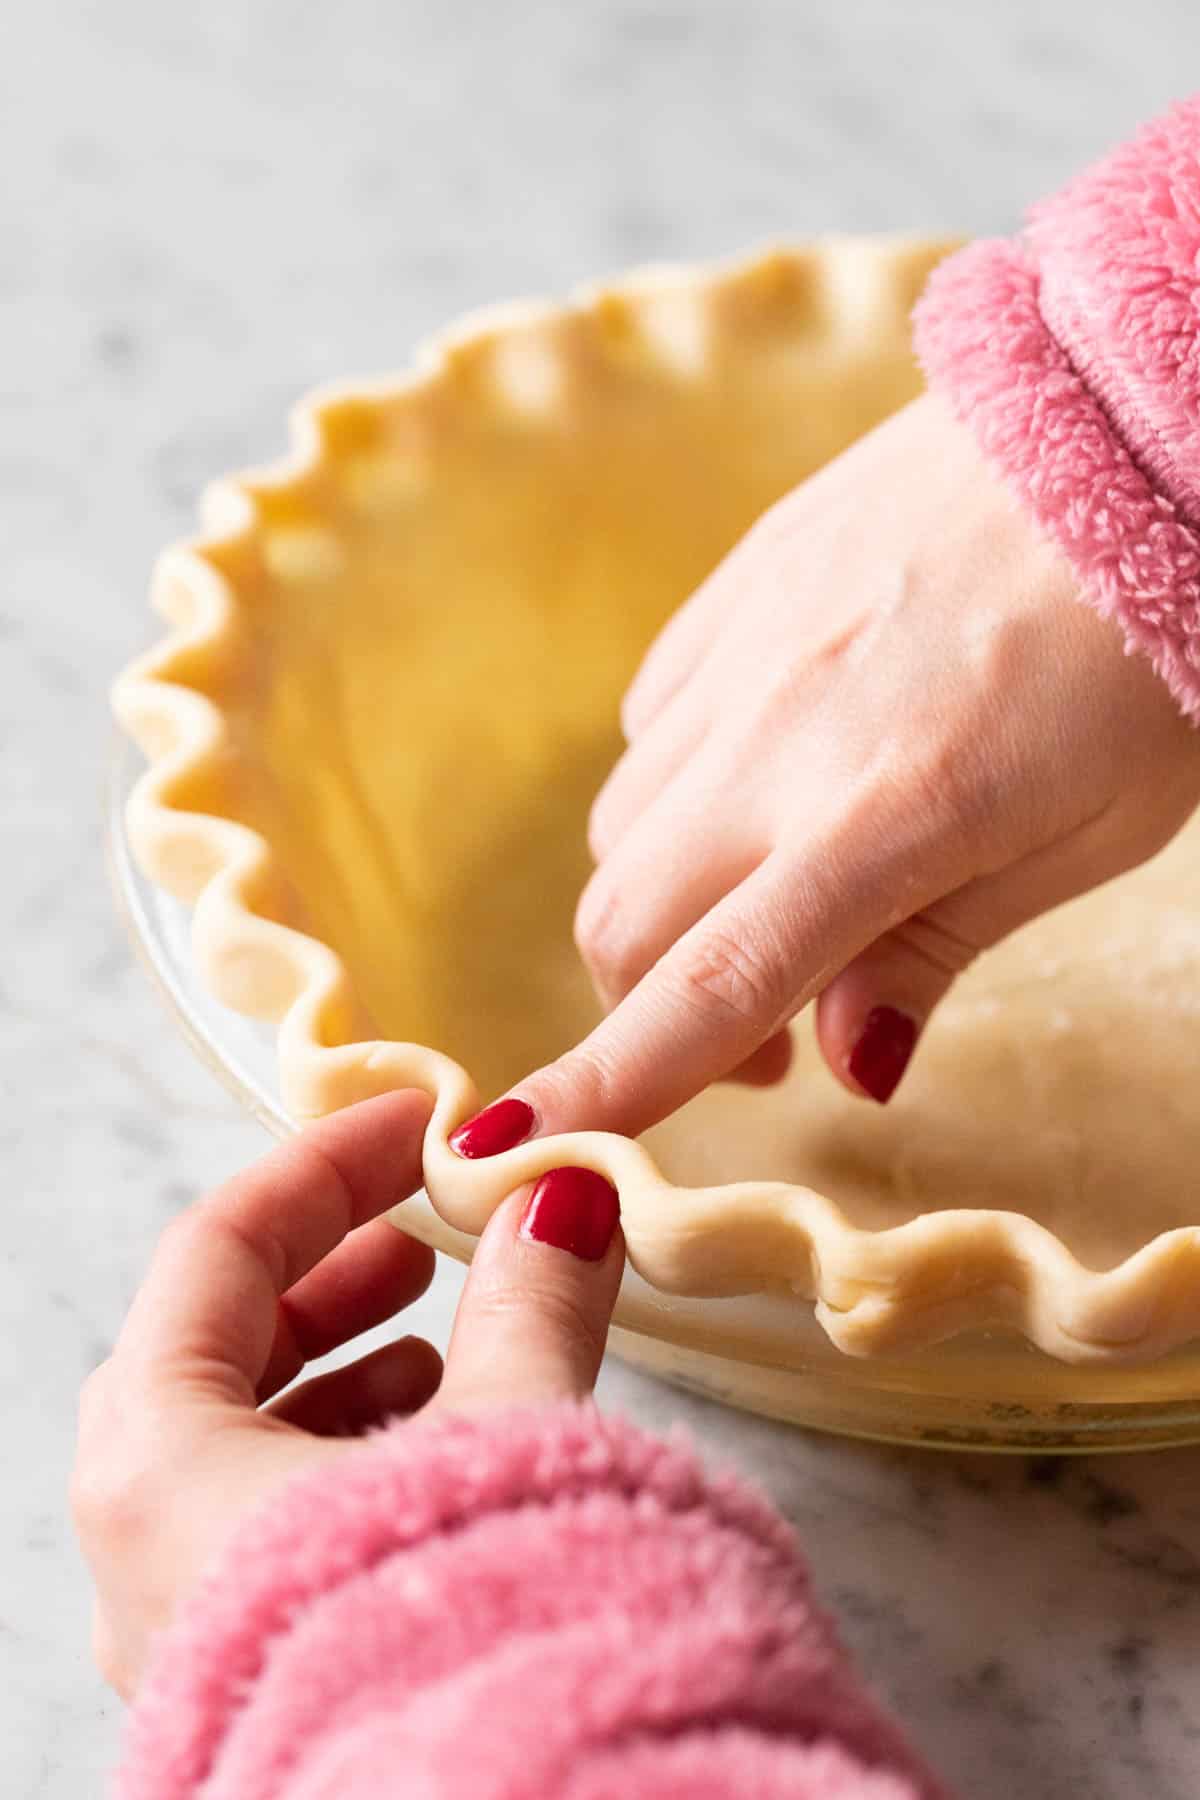 Two hands shaping a fluted pie crust.